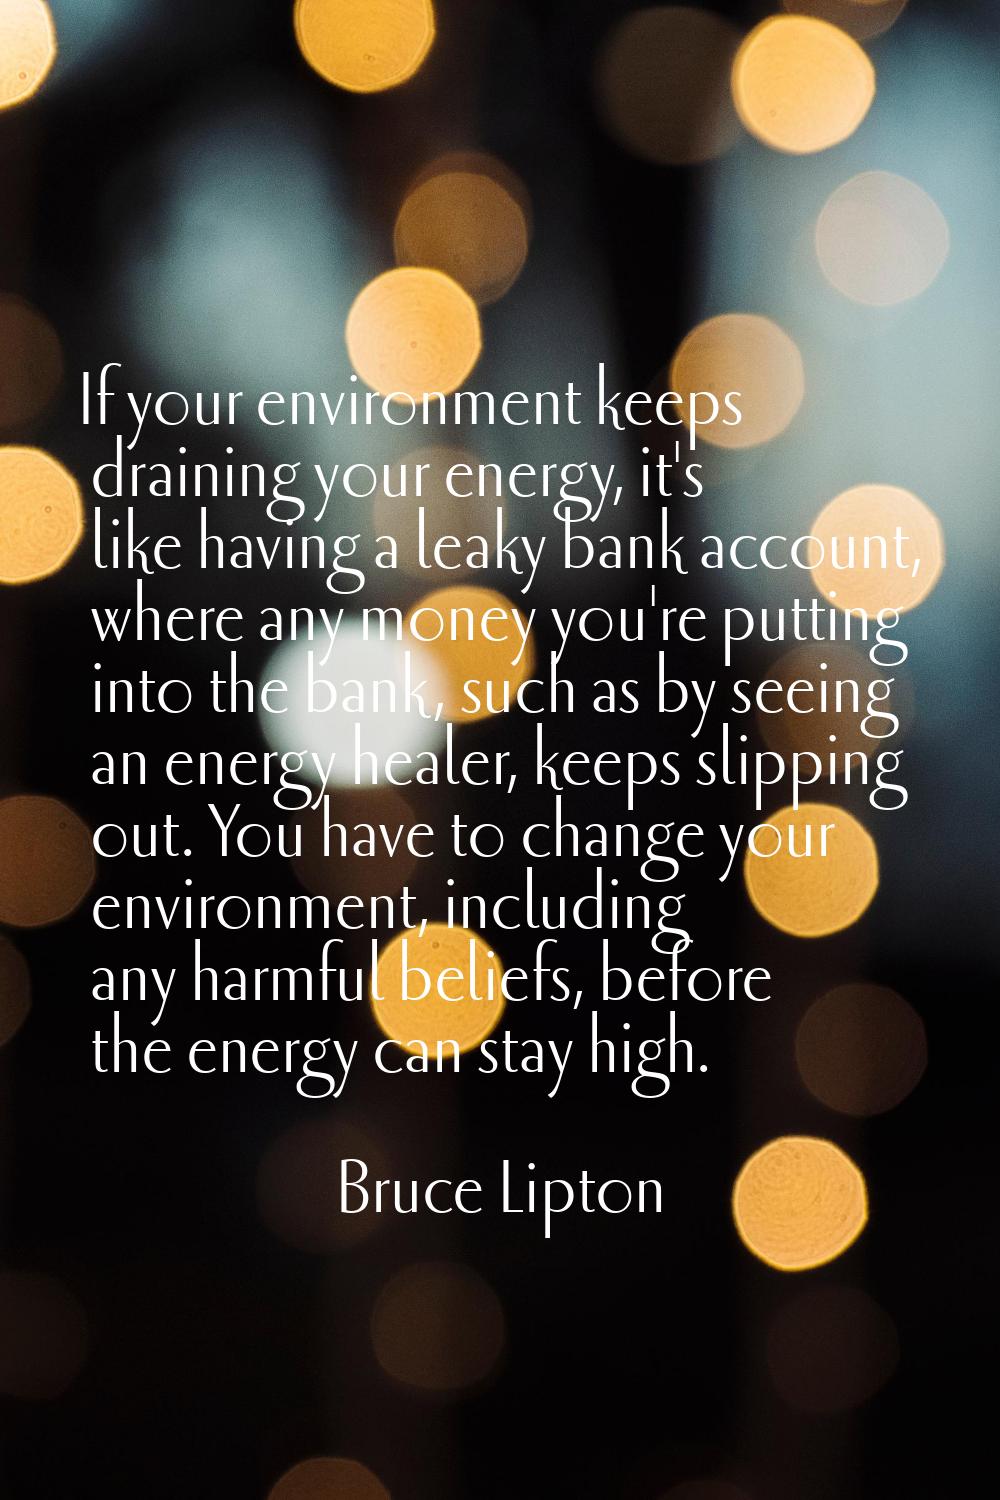 If your environment keeps draining your energy, it's like having a leaky bank account, where any mo